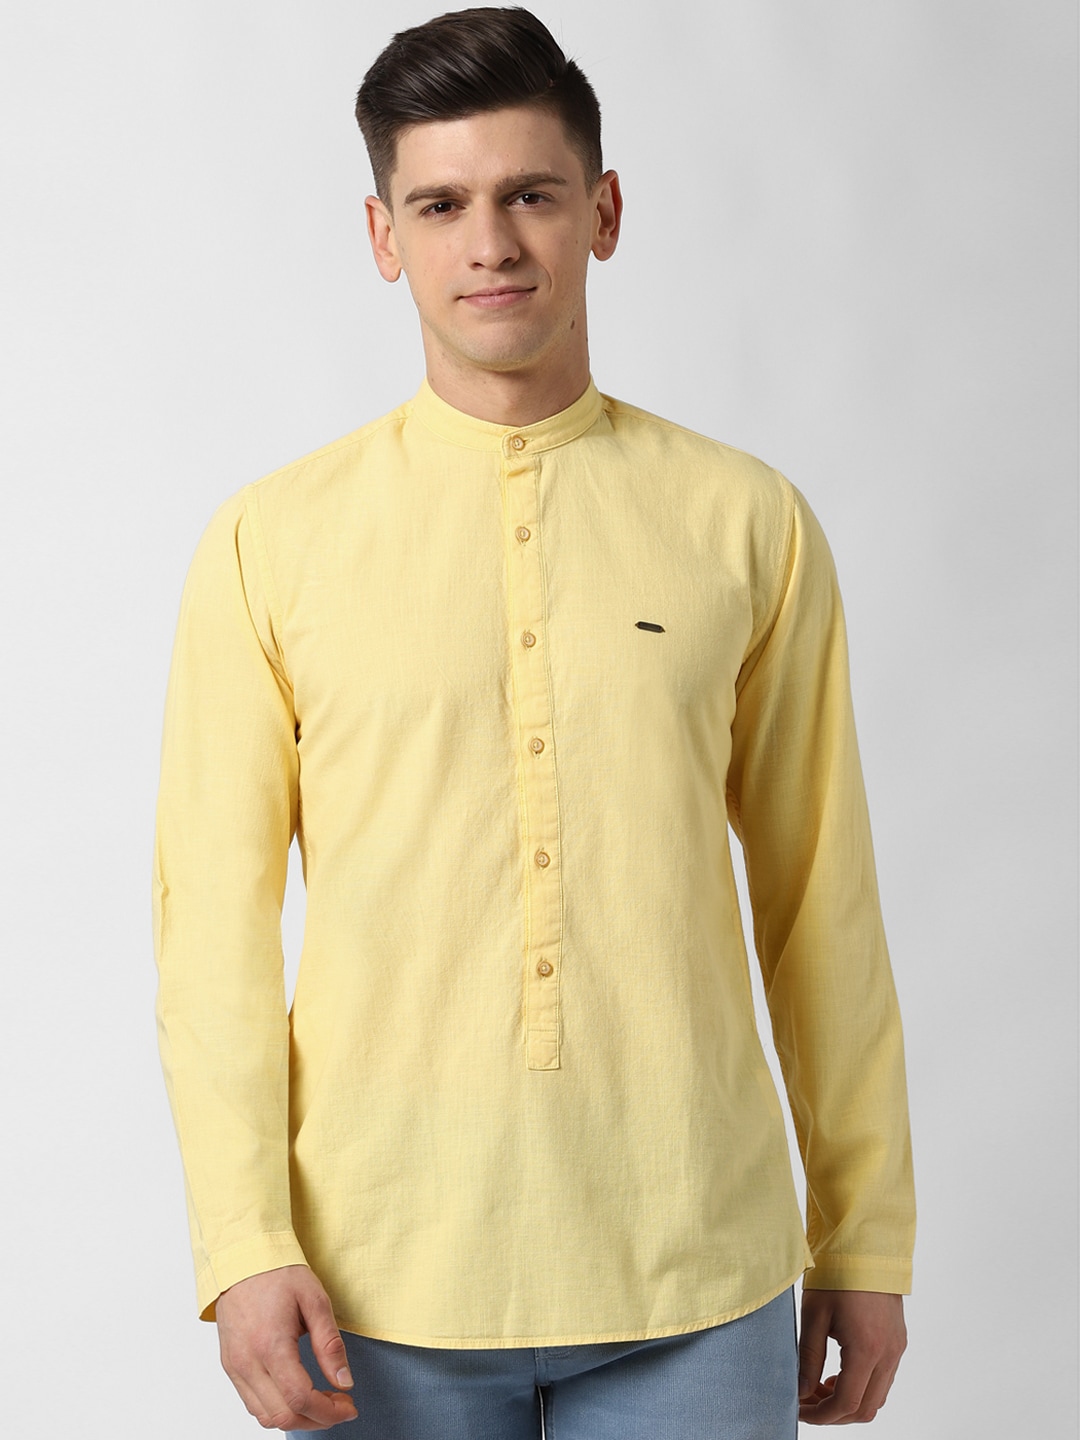 Peter England Casuals Men Yellow Slim Fit Solid Casual Shirt